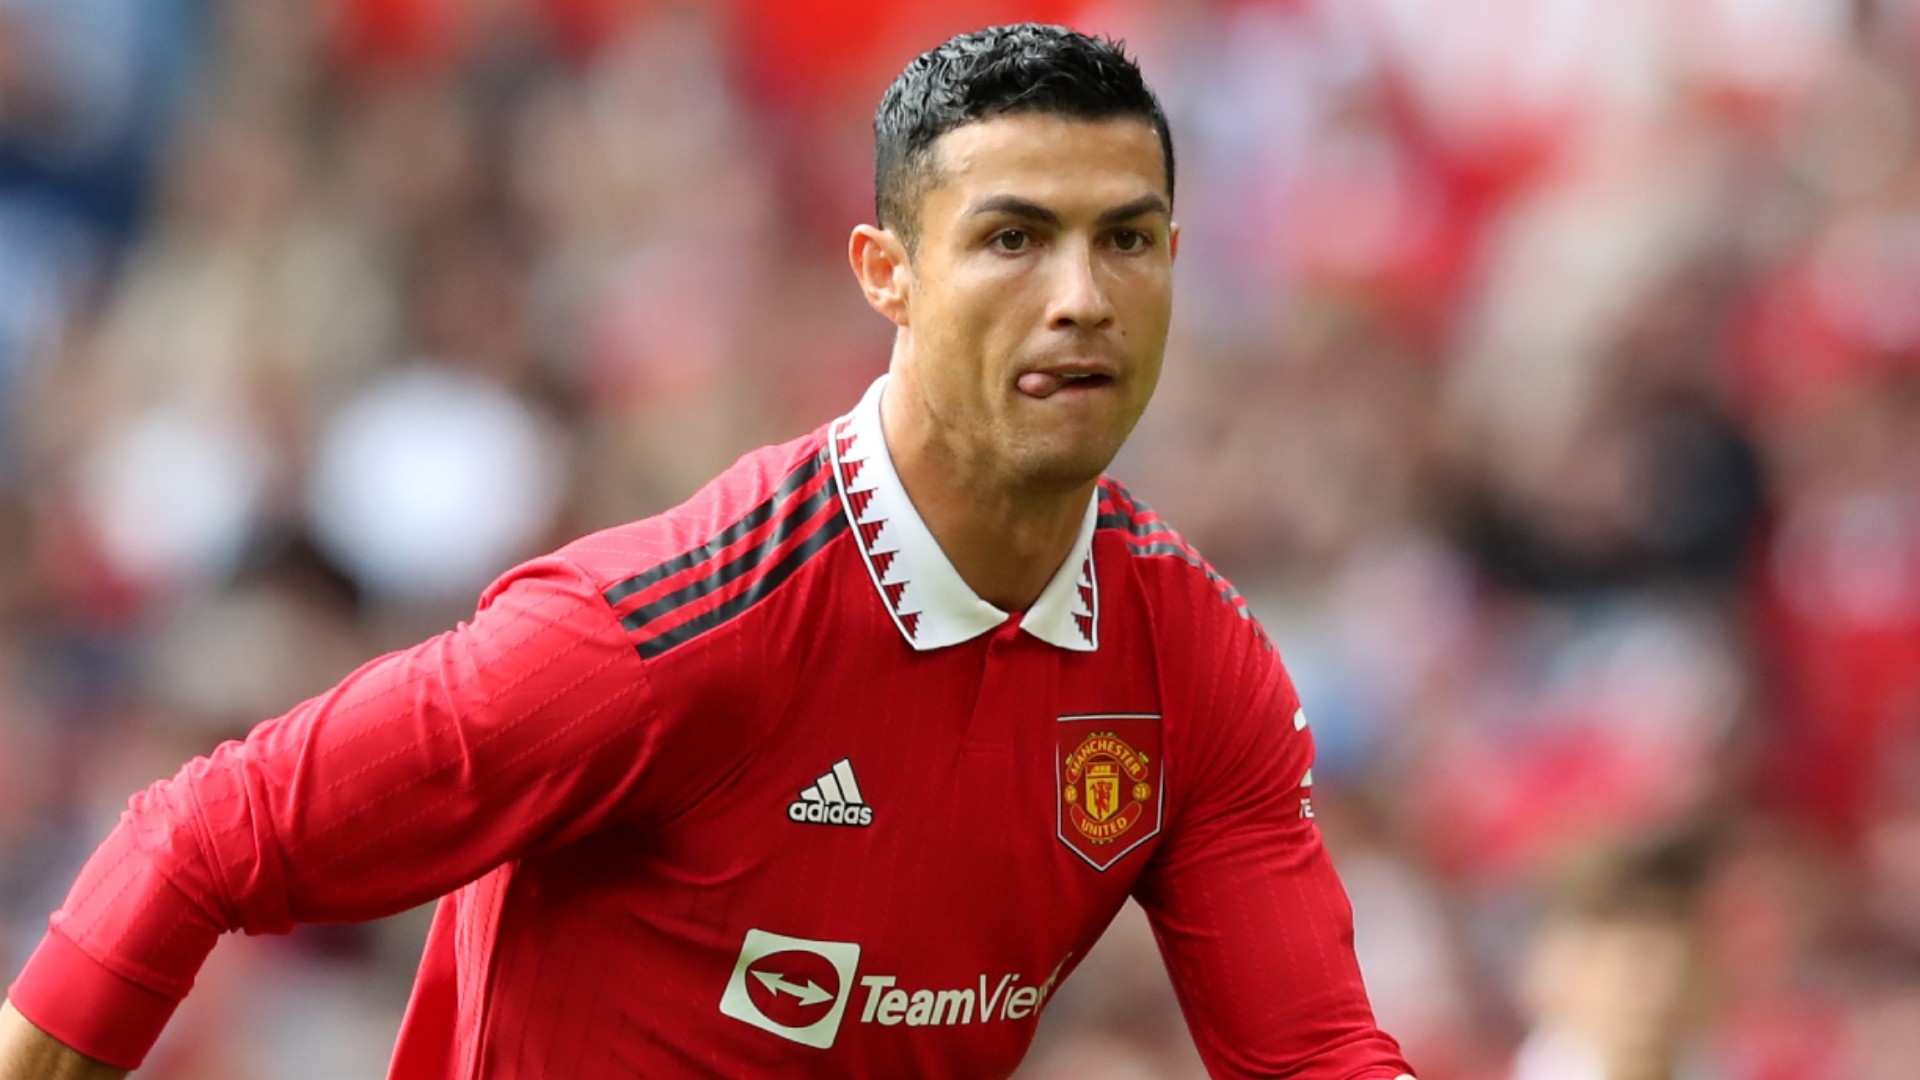 Manchester United player Cristiano Ronaldo in action